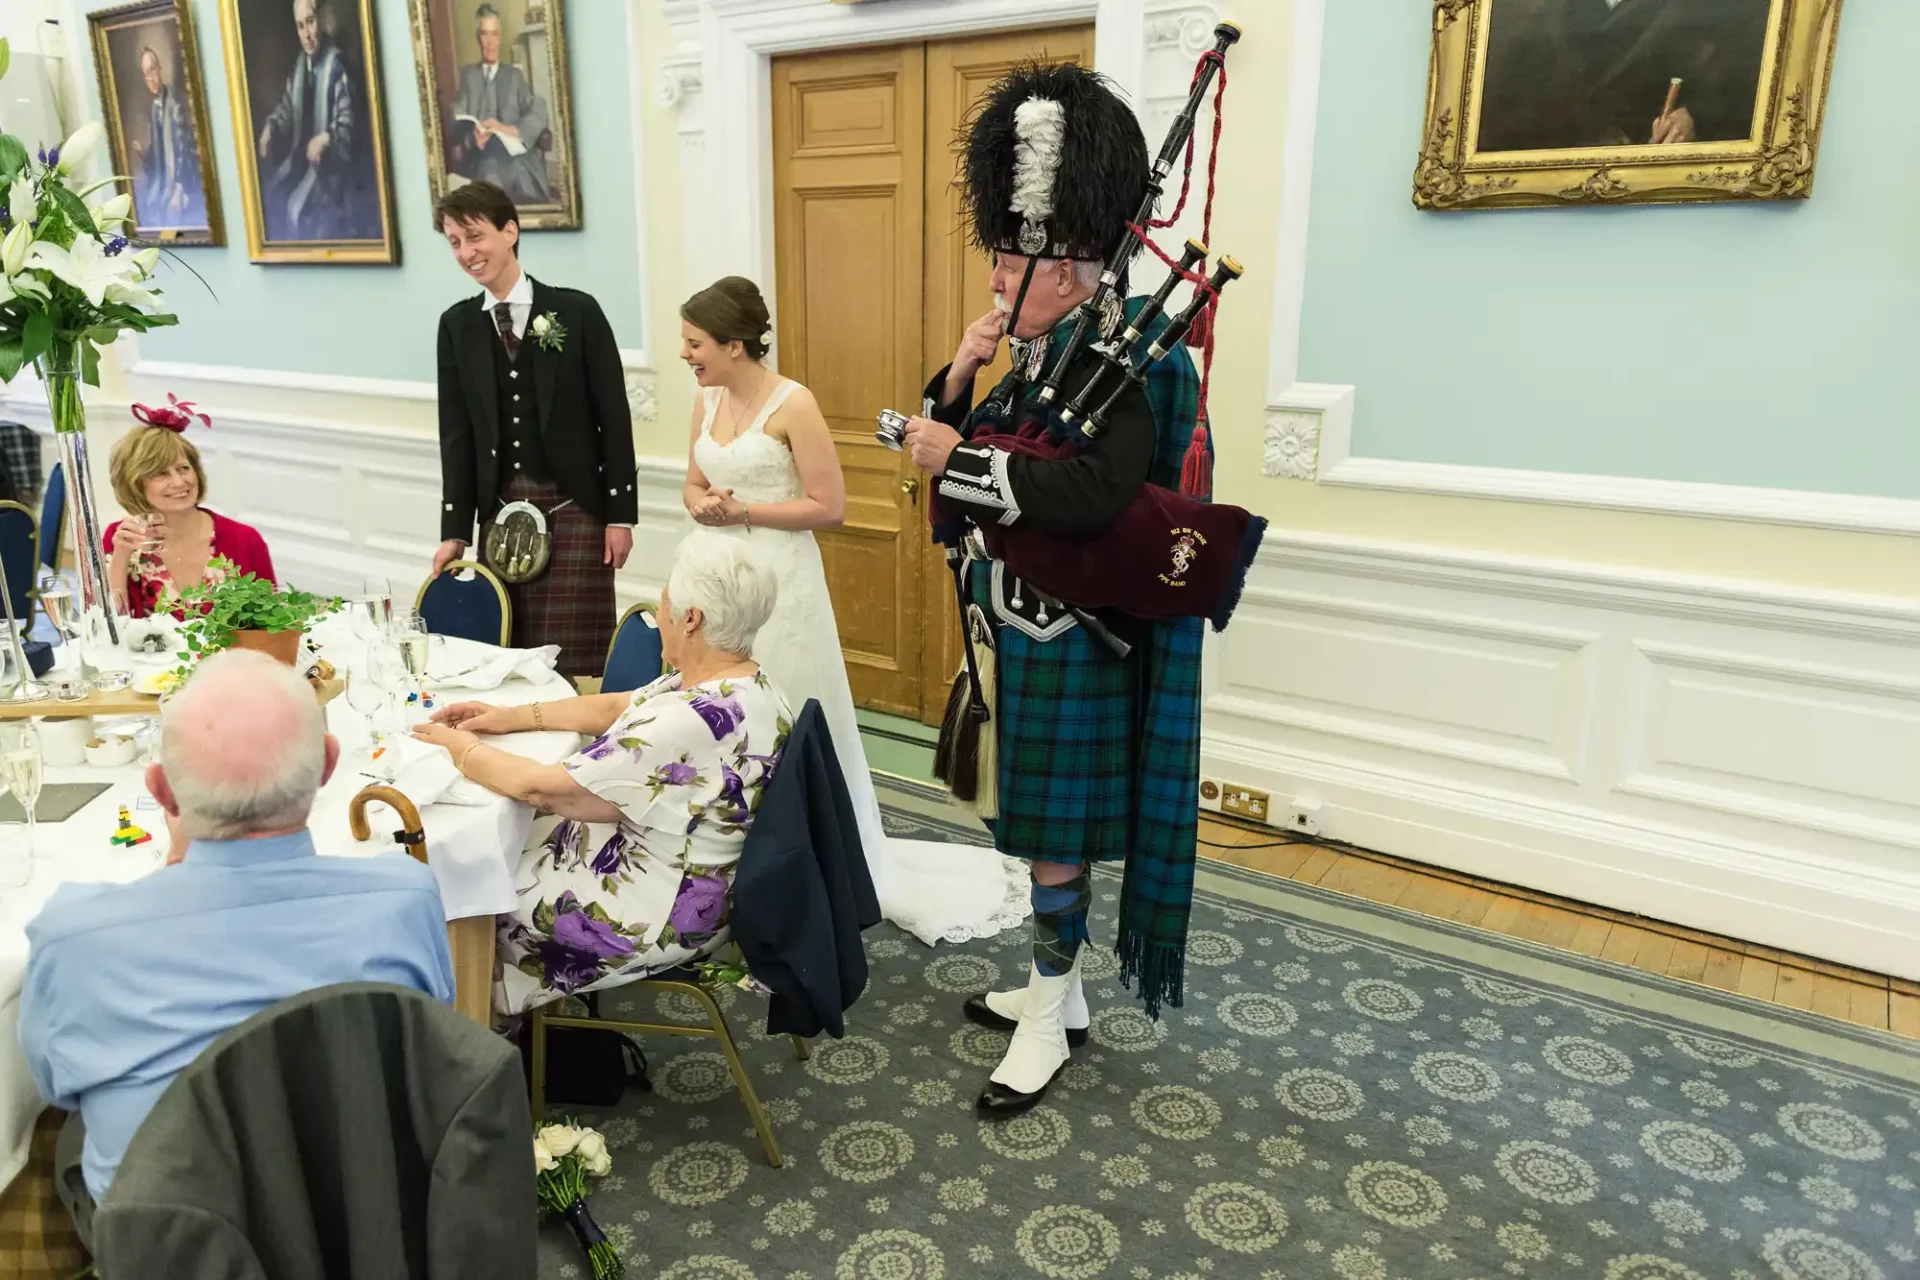 A bagpiper in traditional scottish attire playing at a wedding reception, with guests sitting around tables, observing and smiling.